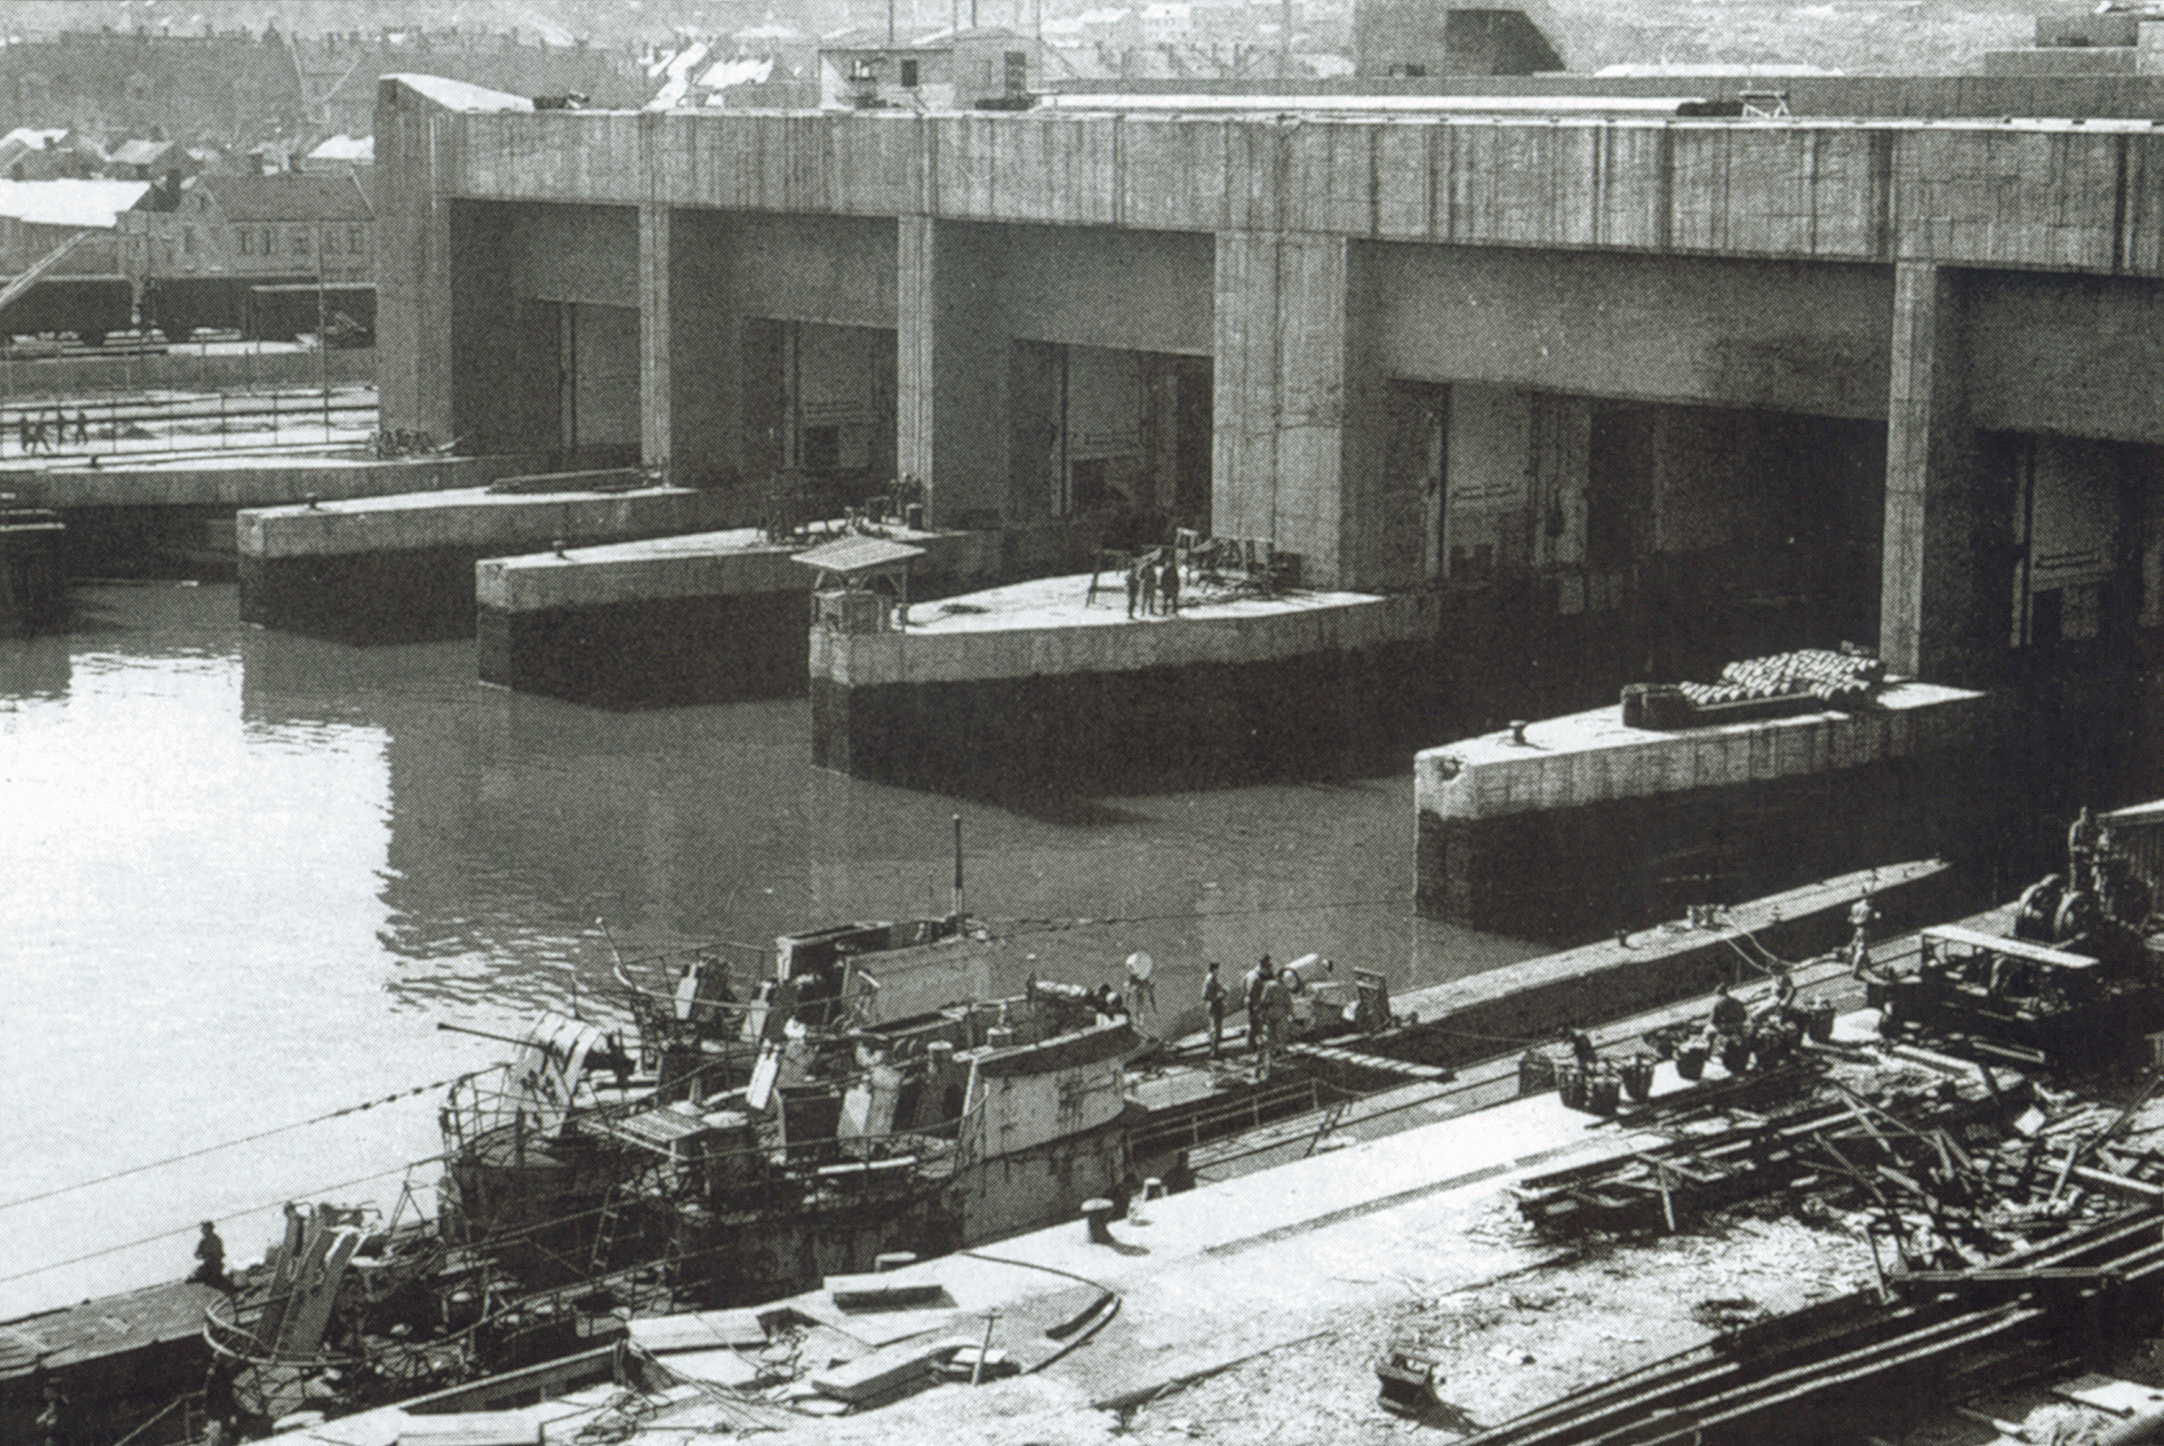 Ian Fleming concocted a number of daring escapades to bring down the Nazis in World War II. One was gathering intelligence on then attacking bomb-proof U-boat pens in France, such as the ones shown here. 